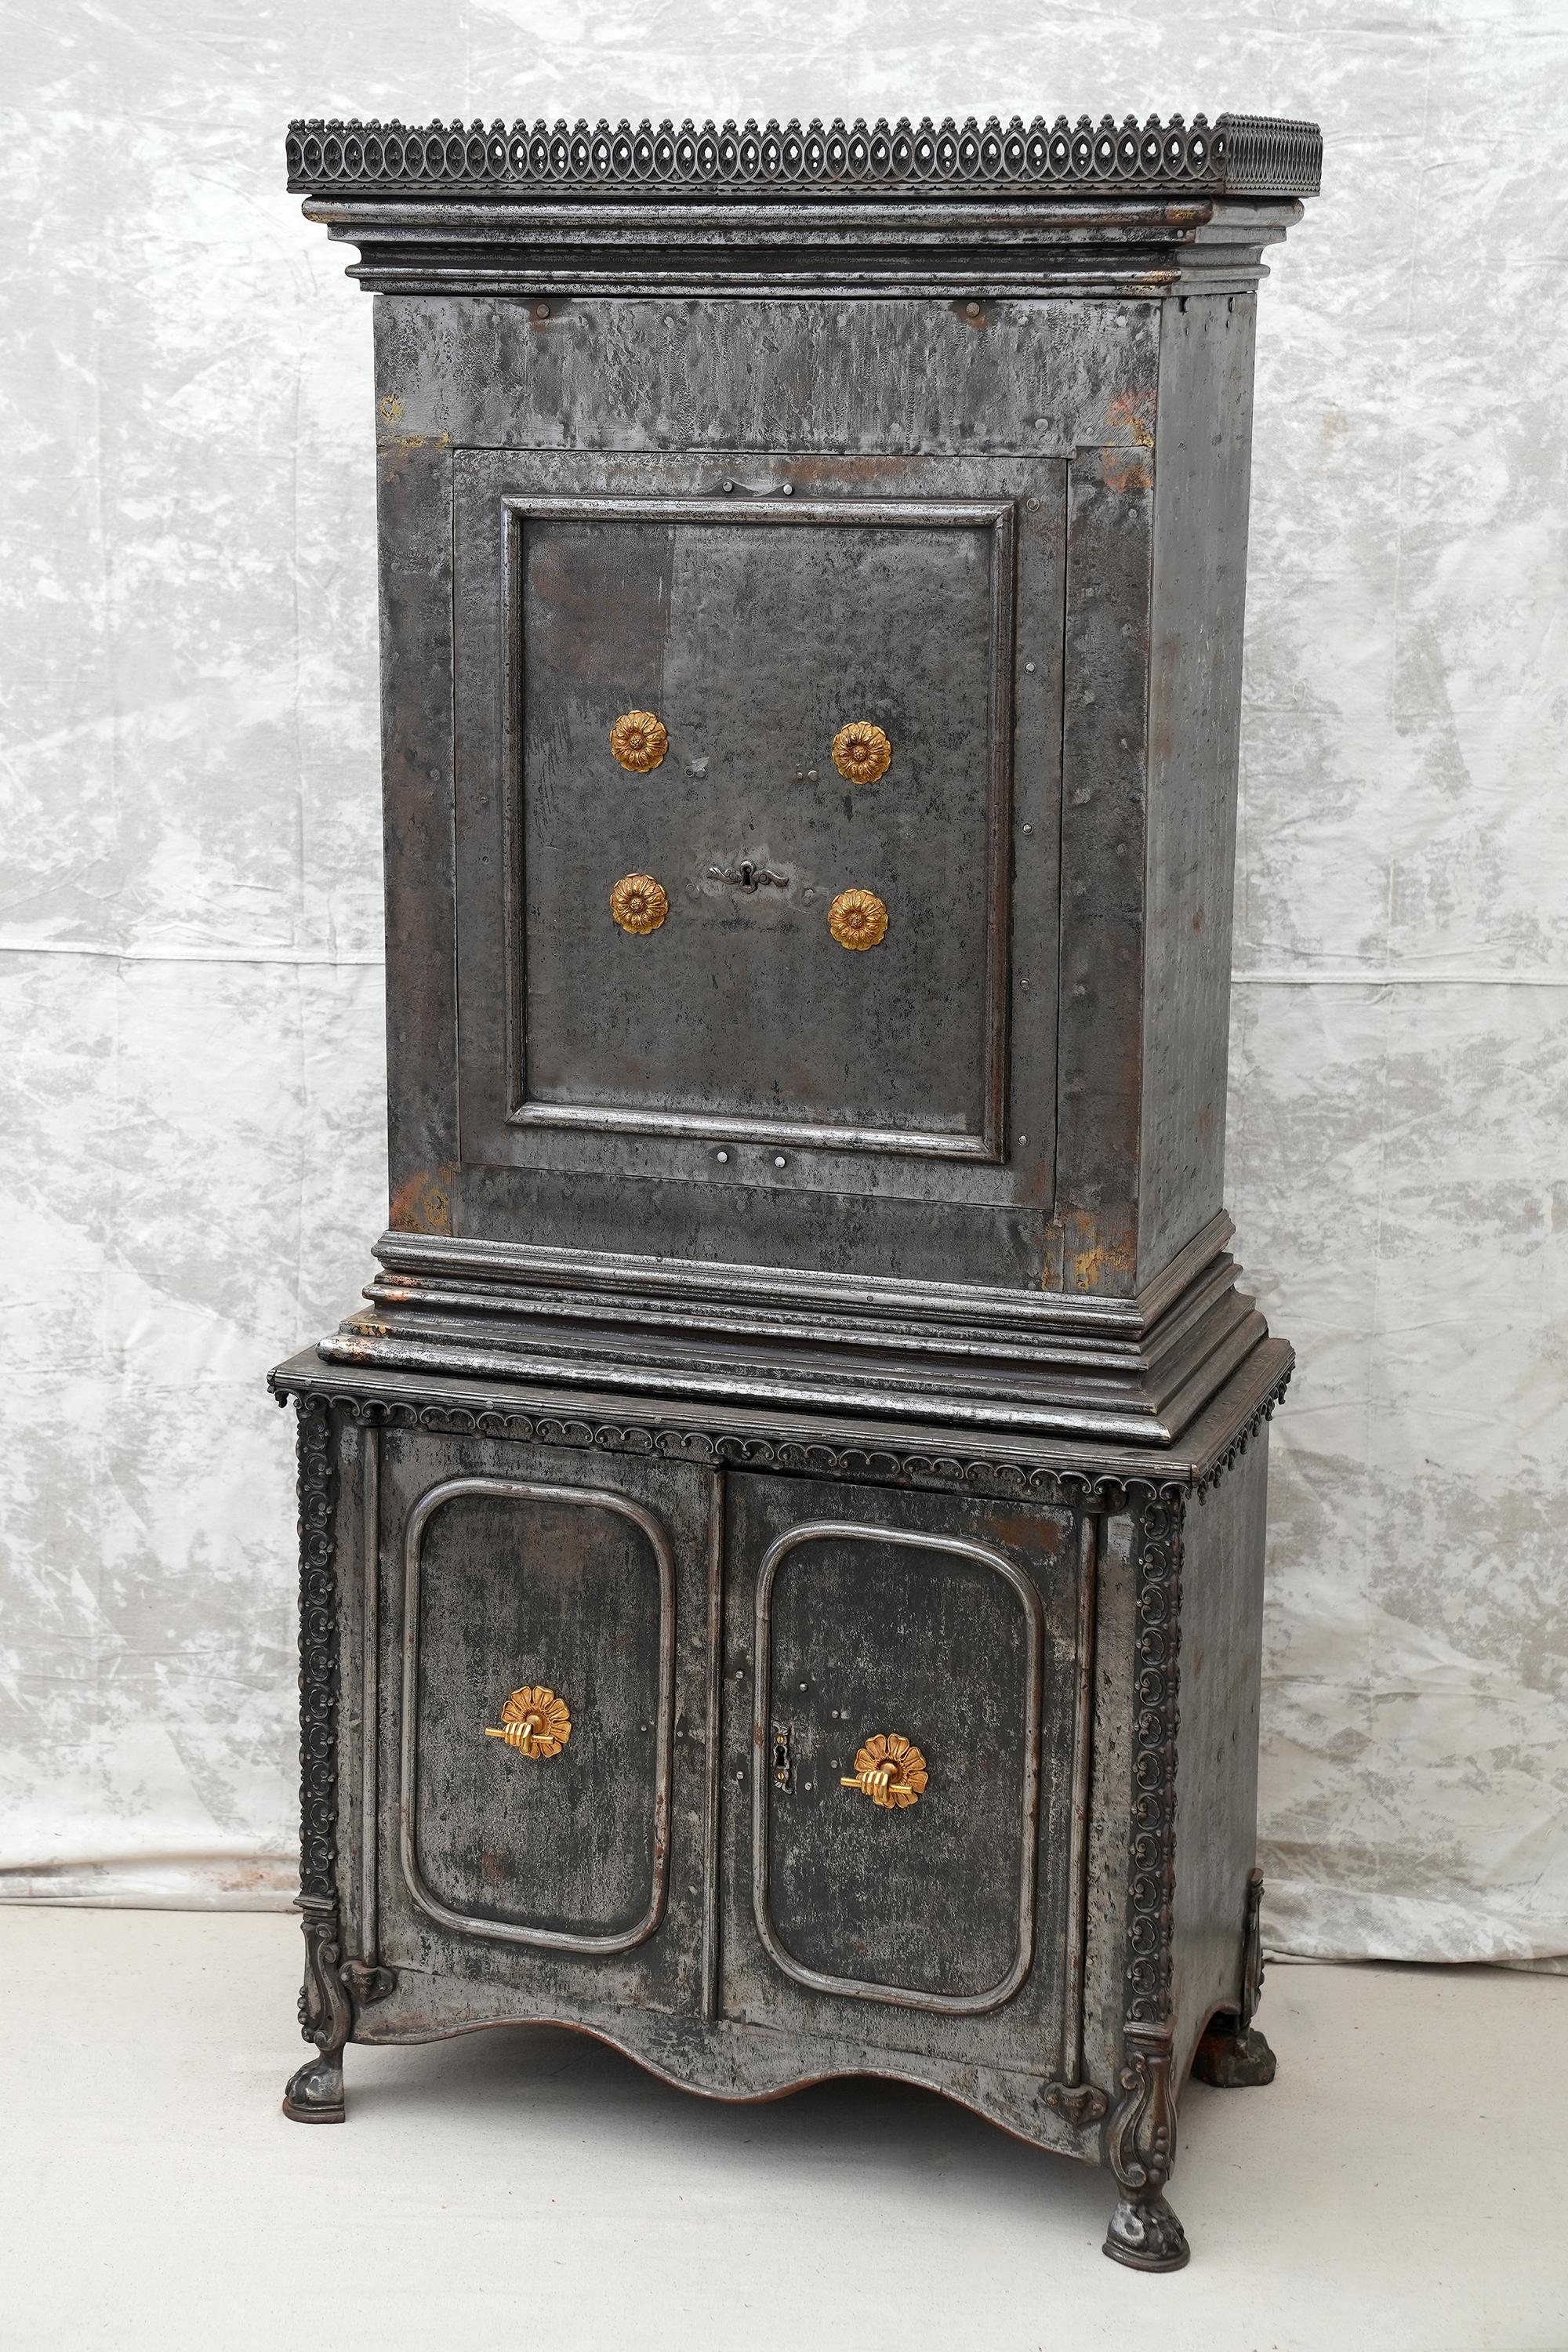 Early 18th-19th c. French steel safe cabinet.
Two part cabinet on paw feet. Complete steel construction with bronze pulls. Amazing function and style. Working locks and keys.